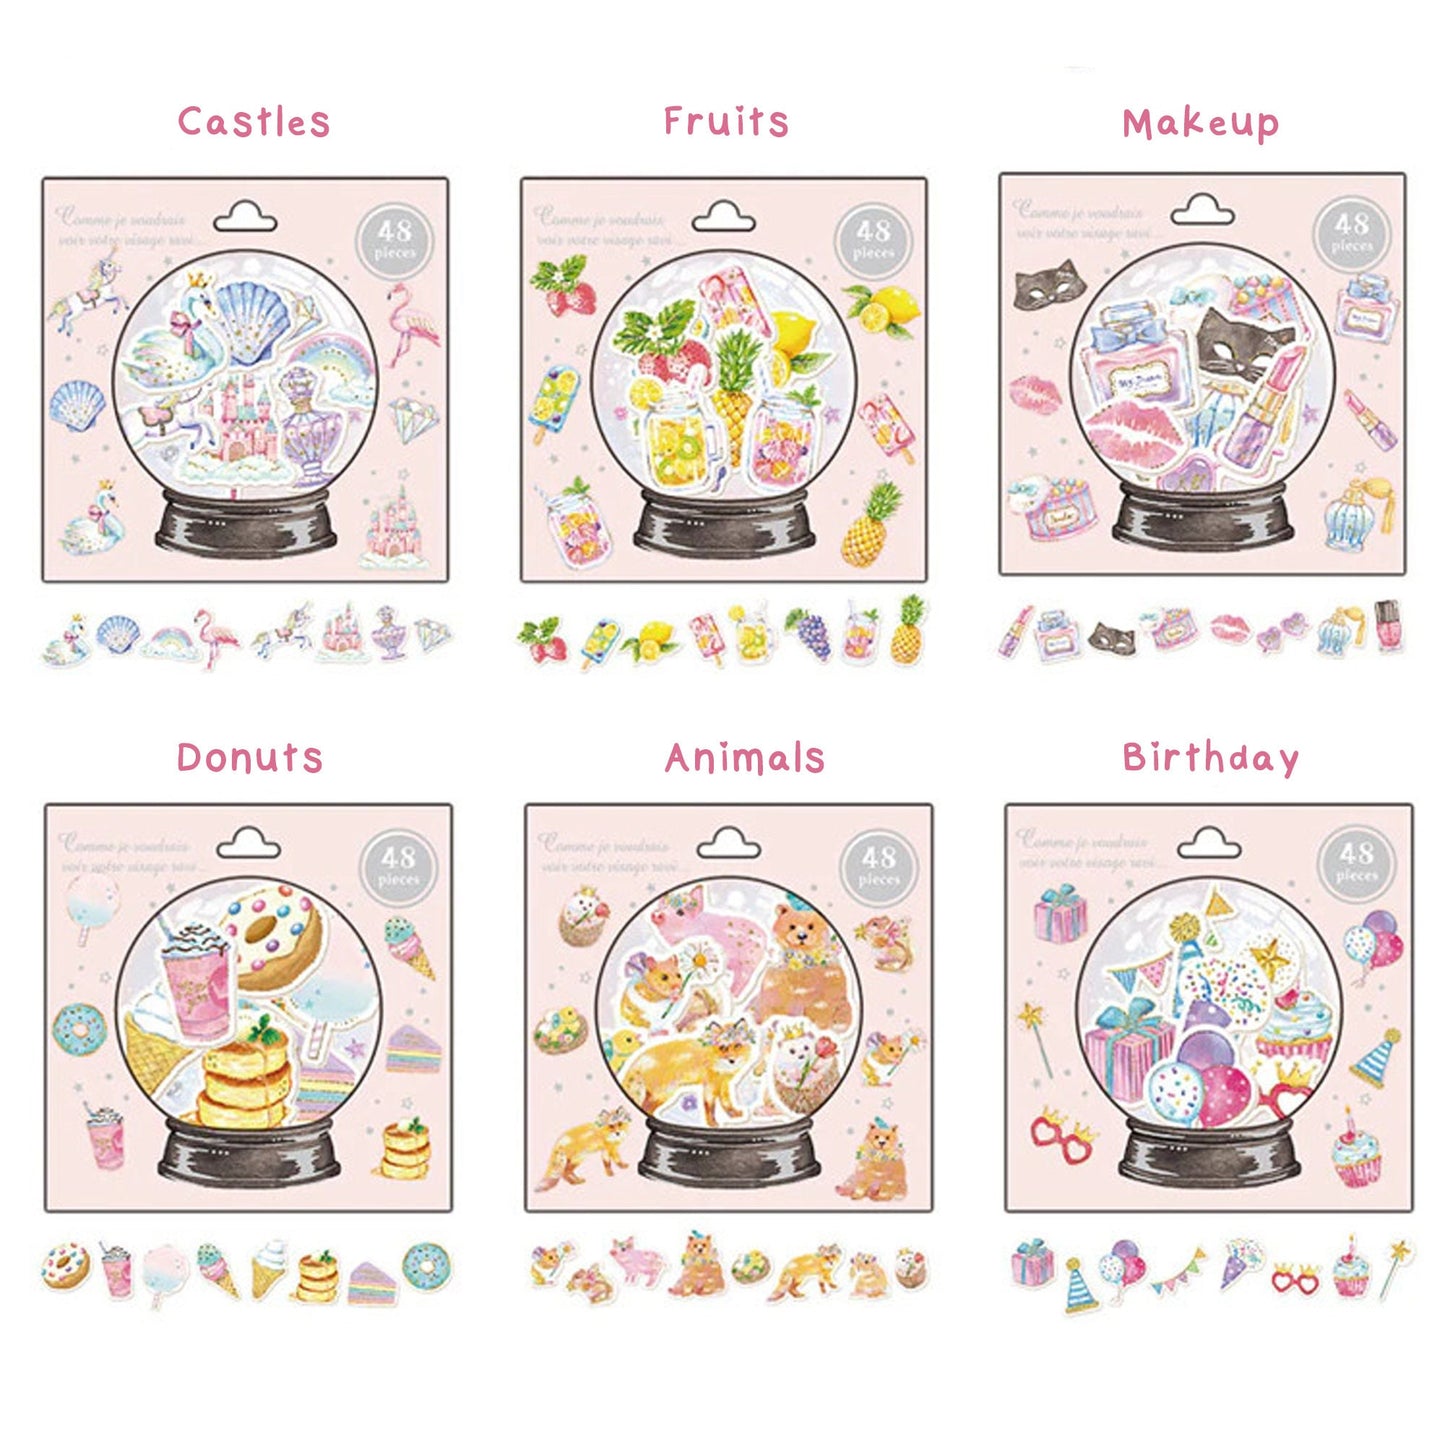 Kawaii Planner Stickers - Cute Stickers - Crystal Ball Washi Stickers - Kawaii stickers - Journal Flakes Stickers, Gold Foil Stickers b2i1